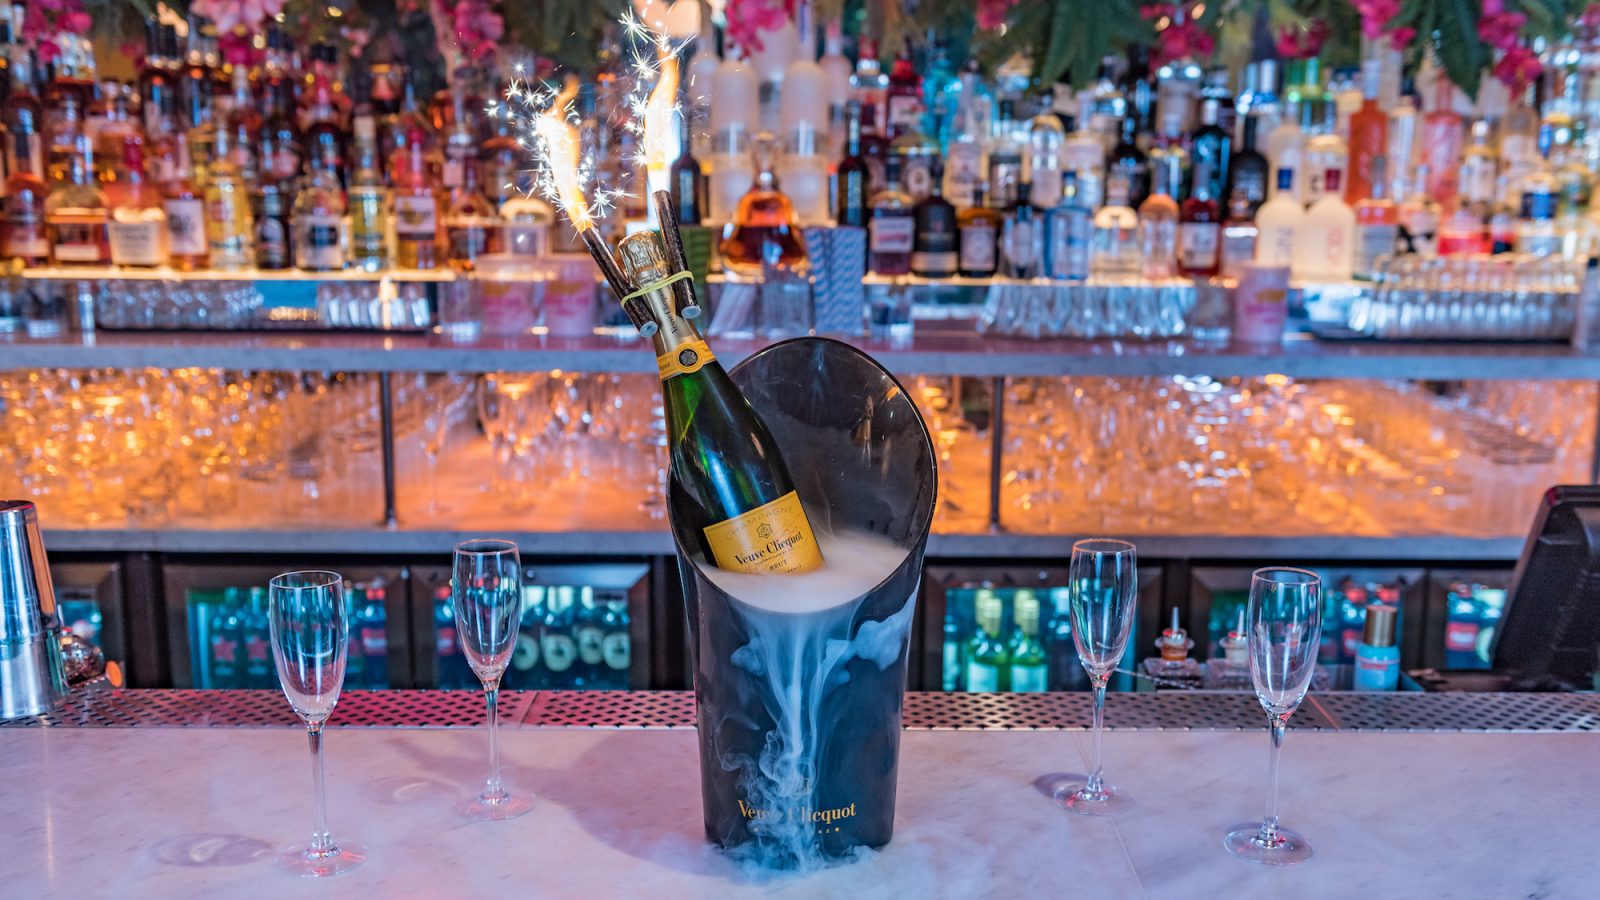 Bottle of Champagne on the bar at Neighbourhood.